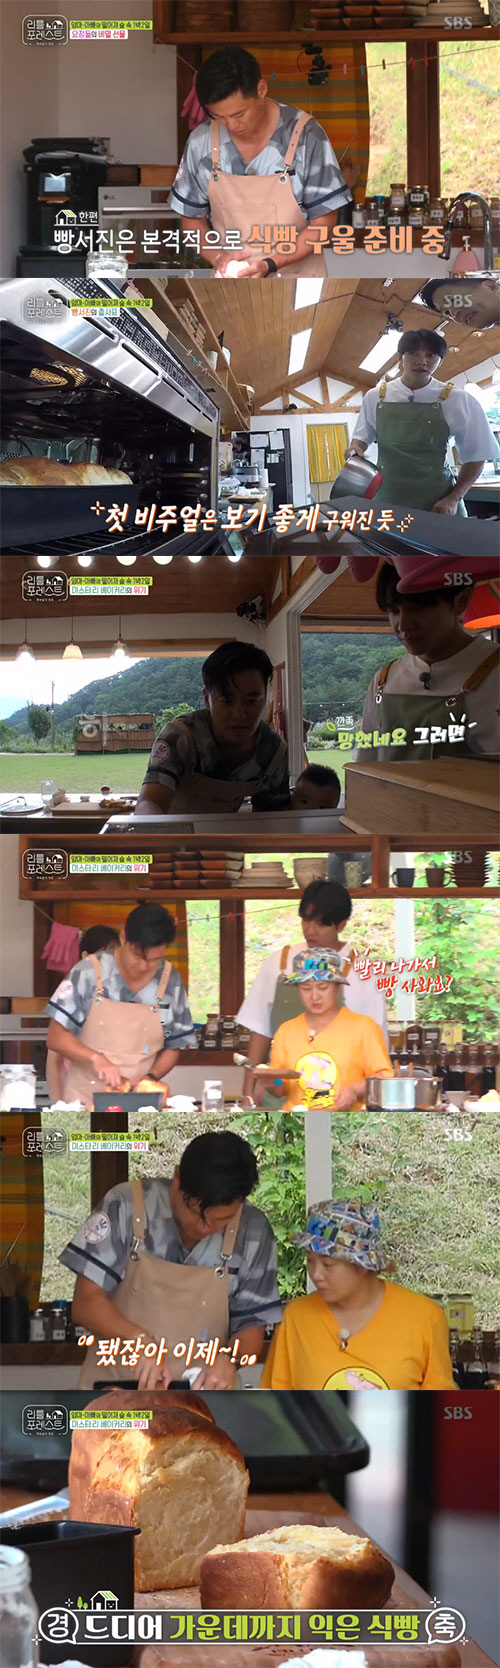 Lee Seo-jin Top Model for making difficult breadLee Seo-jins tough baking Top Model was unveiled on SBSs Monday entertainment Little Forest: Summer of the Blossom (hereinafter referred to as Little Forest).Lee Seung-gi asked the children bread lovers and the children said bagels are good and embarrassed Lee Seo-jin, who was preparing bread.Lee Seo-jin completed the night work on the dough last night for bread, and when he woke up in the morning to check on the well-fermented dough and smiled.Lee Seo-jin asked Lee Han-yi, who was working on Lee Seo-jin, What bread do you like? Do you like bread? Lee Han-yi said, No.I like toast, he said, embarrassing Lee Seo-jin.The children also took the blueberry and started making the Space Jam by making the Top Model, and the children started making the Space Jam by rubbing the creature with their small hands.At this time, Brooke touched the blueberry and started to put it in his mouth one by one, and he continued to put it in his mouth without stopping, confessing, I keep going into my mouth.In the end, Park finished the Space Jam with the blueberries that the children were kneading.Lee Seo-jin put the dough into the frame and put it in the oven to bake the bread in a discordant manner; the children were also waiting for Lee Seo-jins bread, saying, Give me the bread.The members also said, I smell from the bakery.But the walls of actual baking were higher than expected.The visual reminded me of the bread of a famous bakery, but the middle part was less ripe, and Lee Seung-gi laughed as he started to tease Lee Seo-jin.Eventually Lee Seo-jin began to worry about the lesser bread in the oven.The children who tasted the finished bread in the front part of the book were please but the bread was not finished yet, and Lee Seo-jin laughed with a hard excuse saying I will eat breakfast now.The second baked bread came out, but the middle part still did not get ripe, and Lee Seung-gi teased Lee Seo-jin again, Go out and buy bread.Lee Seo-jin said, It was not as expected. It would have been ripe if it was six.Eventually Lee Seo-jin put the third bread in the Oven, eventually making the perfect bread and smiling.